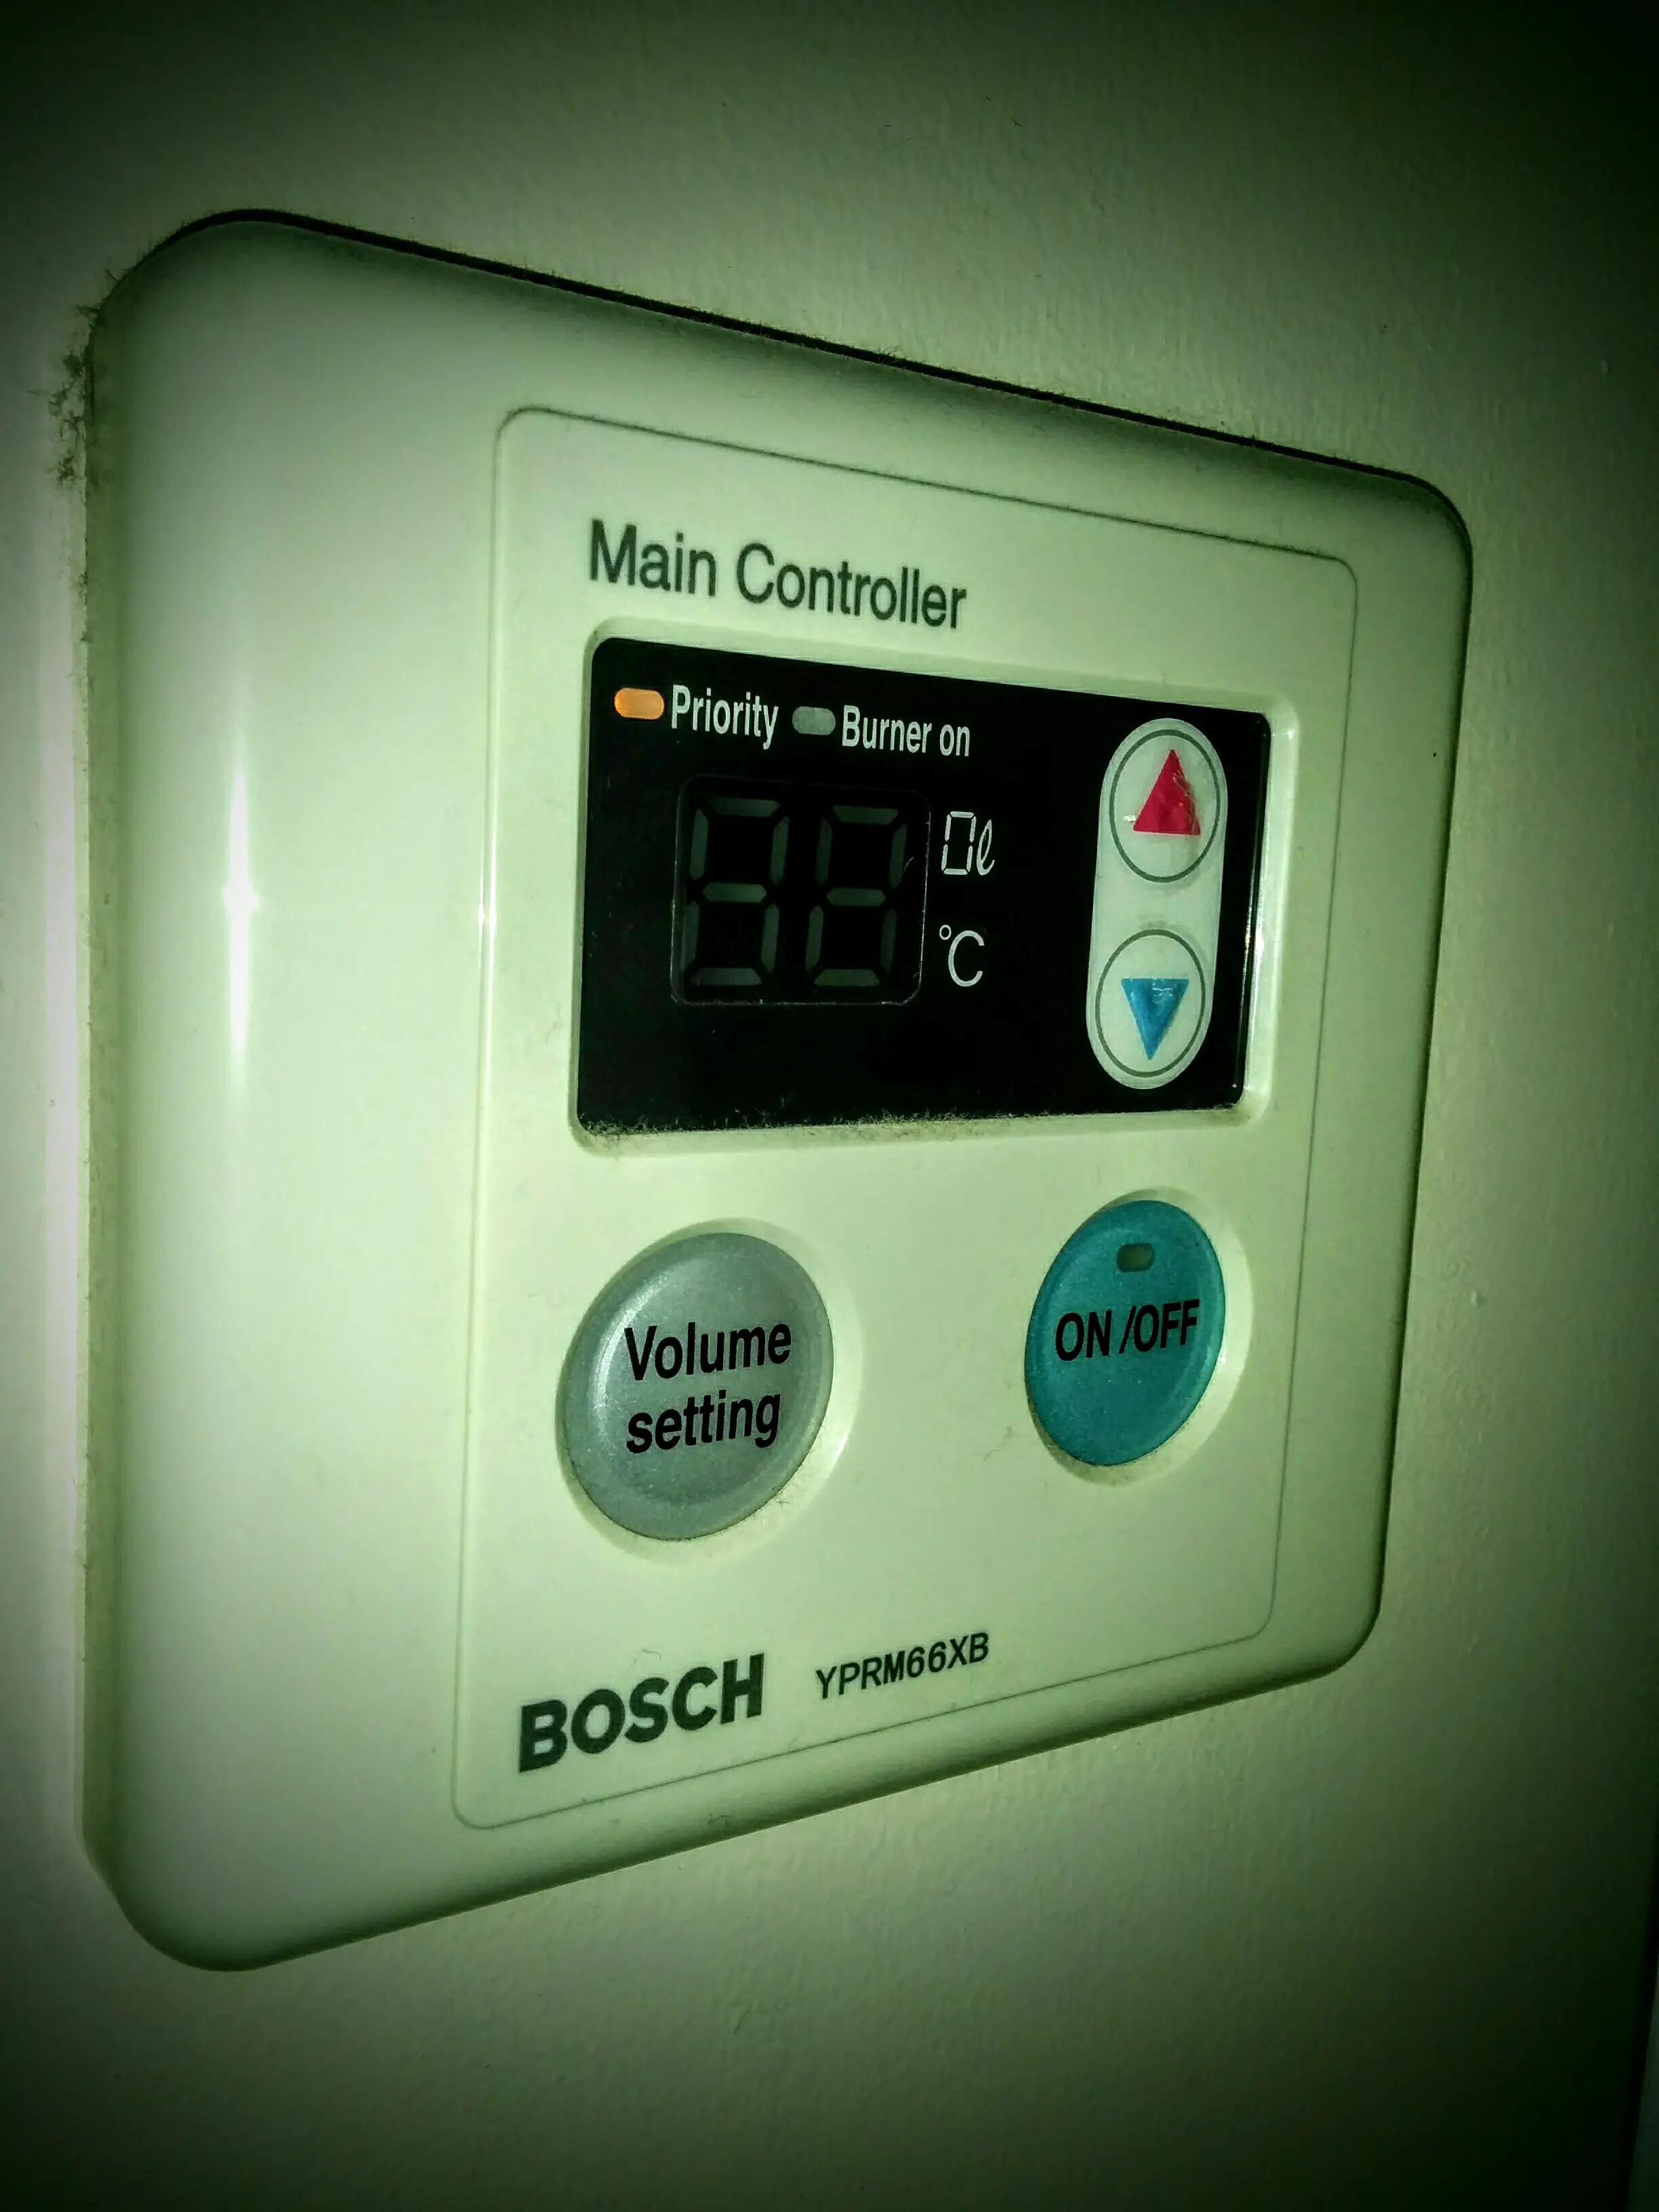 How To Repair Bosch Hot Water Controller Like The Yprm66xb Easy